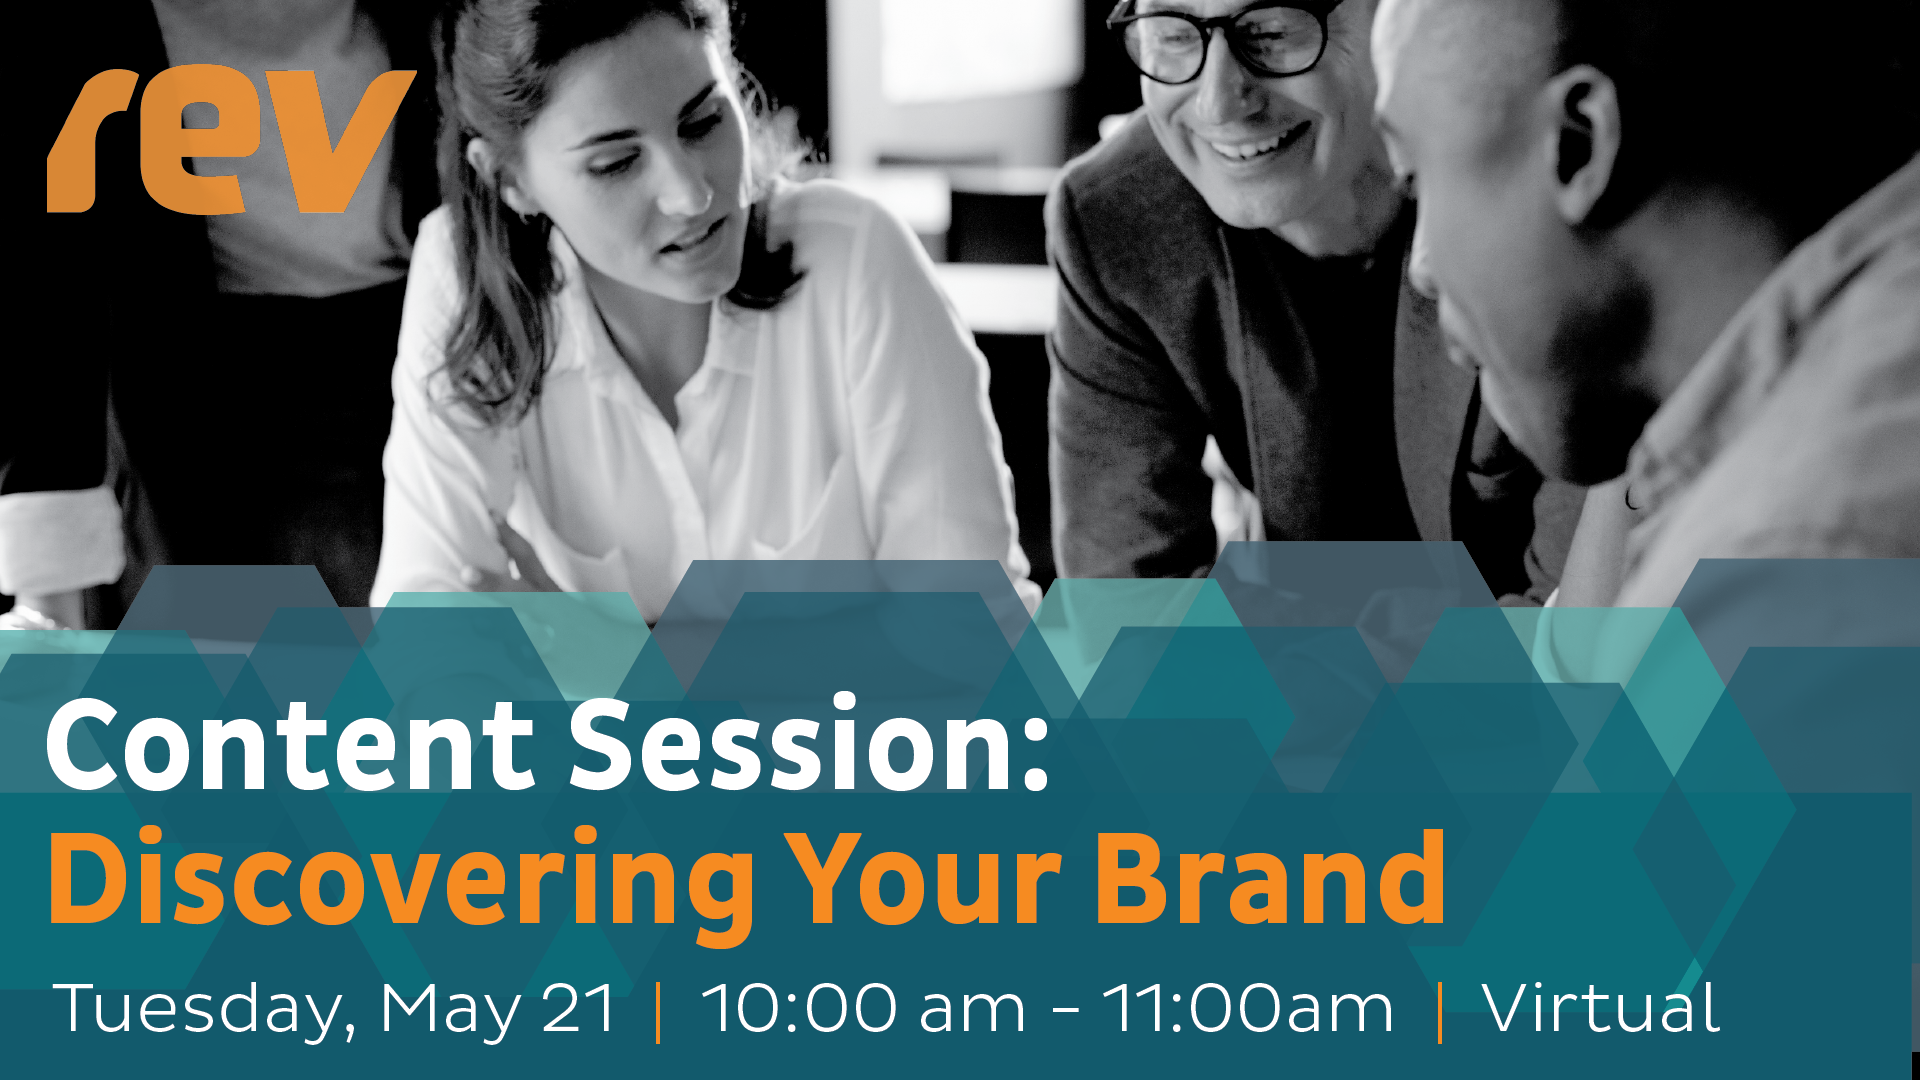 Graphic for the Rev Content Session: Discovering Your Brand.